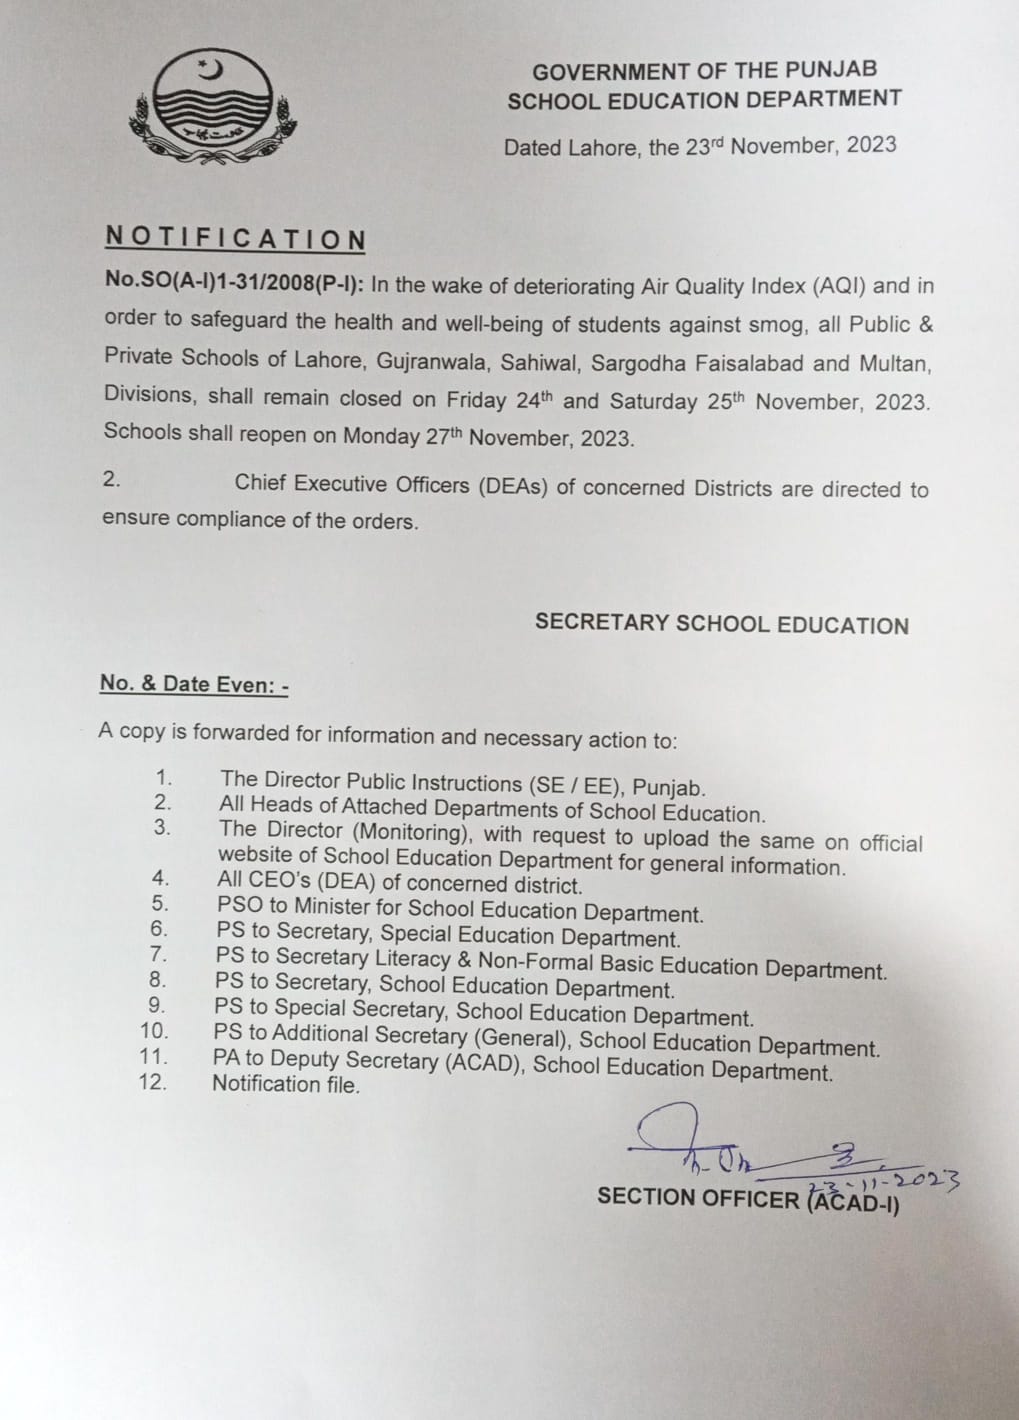 Notification of Holiday on Friday, Saturday and Sunday Punjab 6 Districts